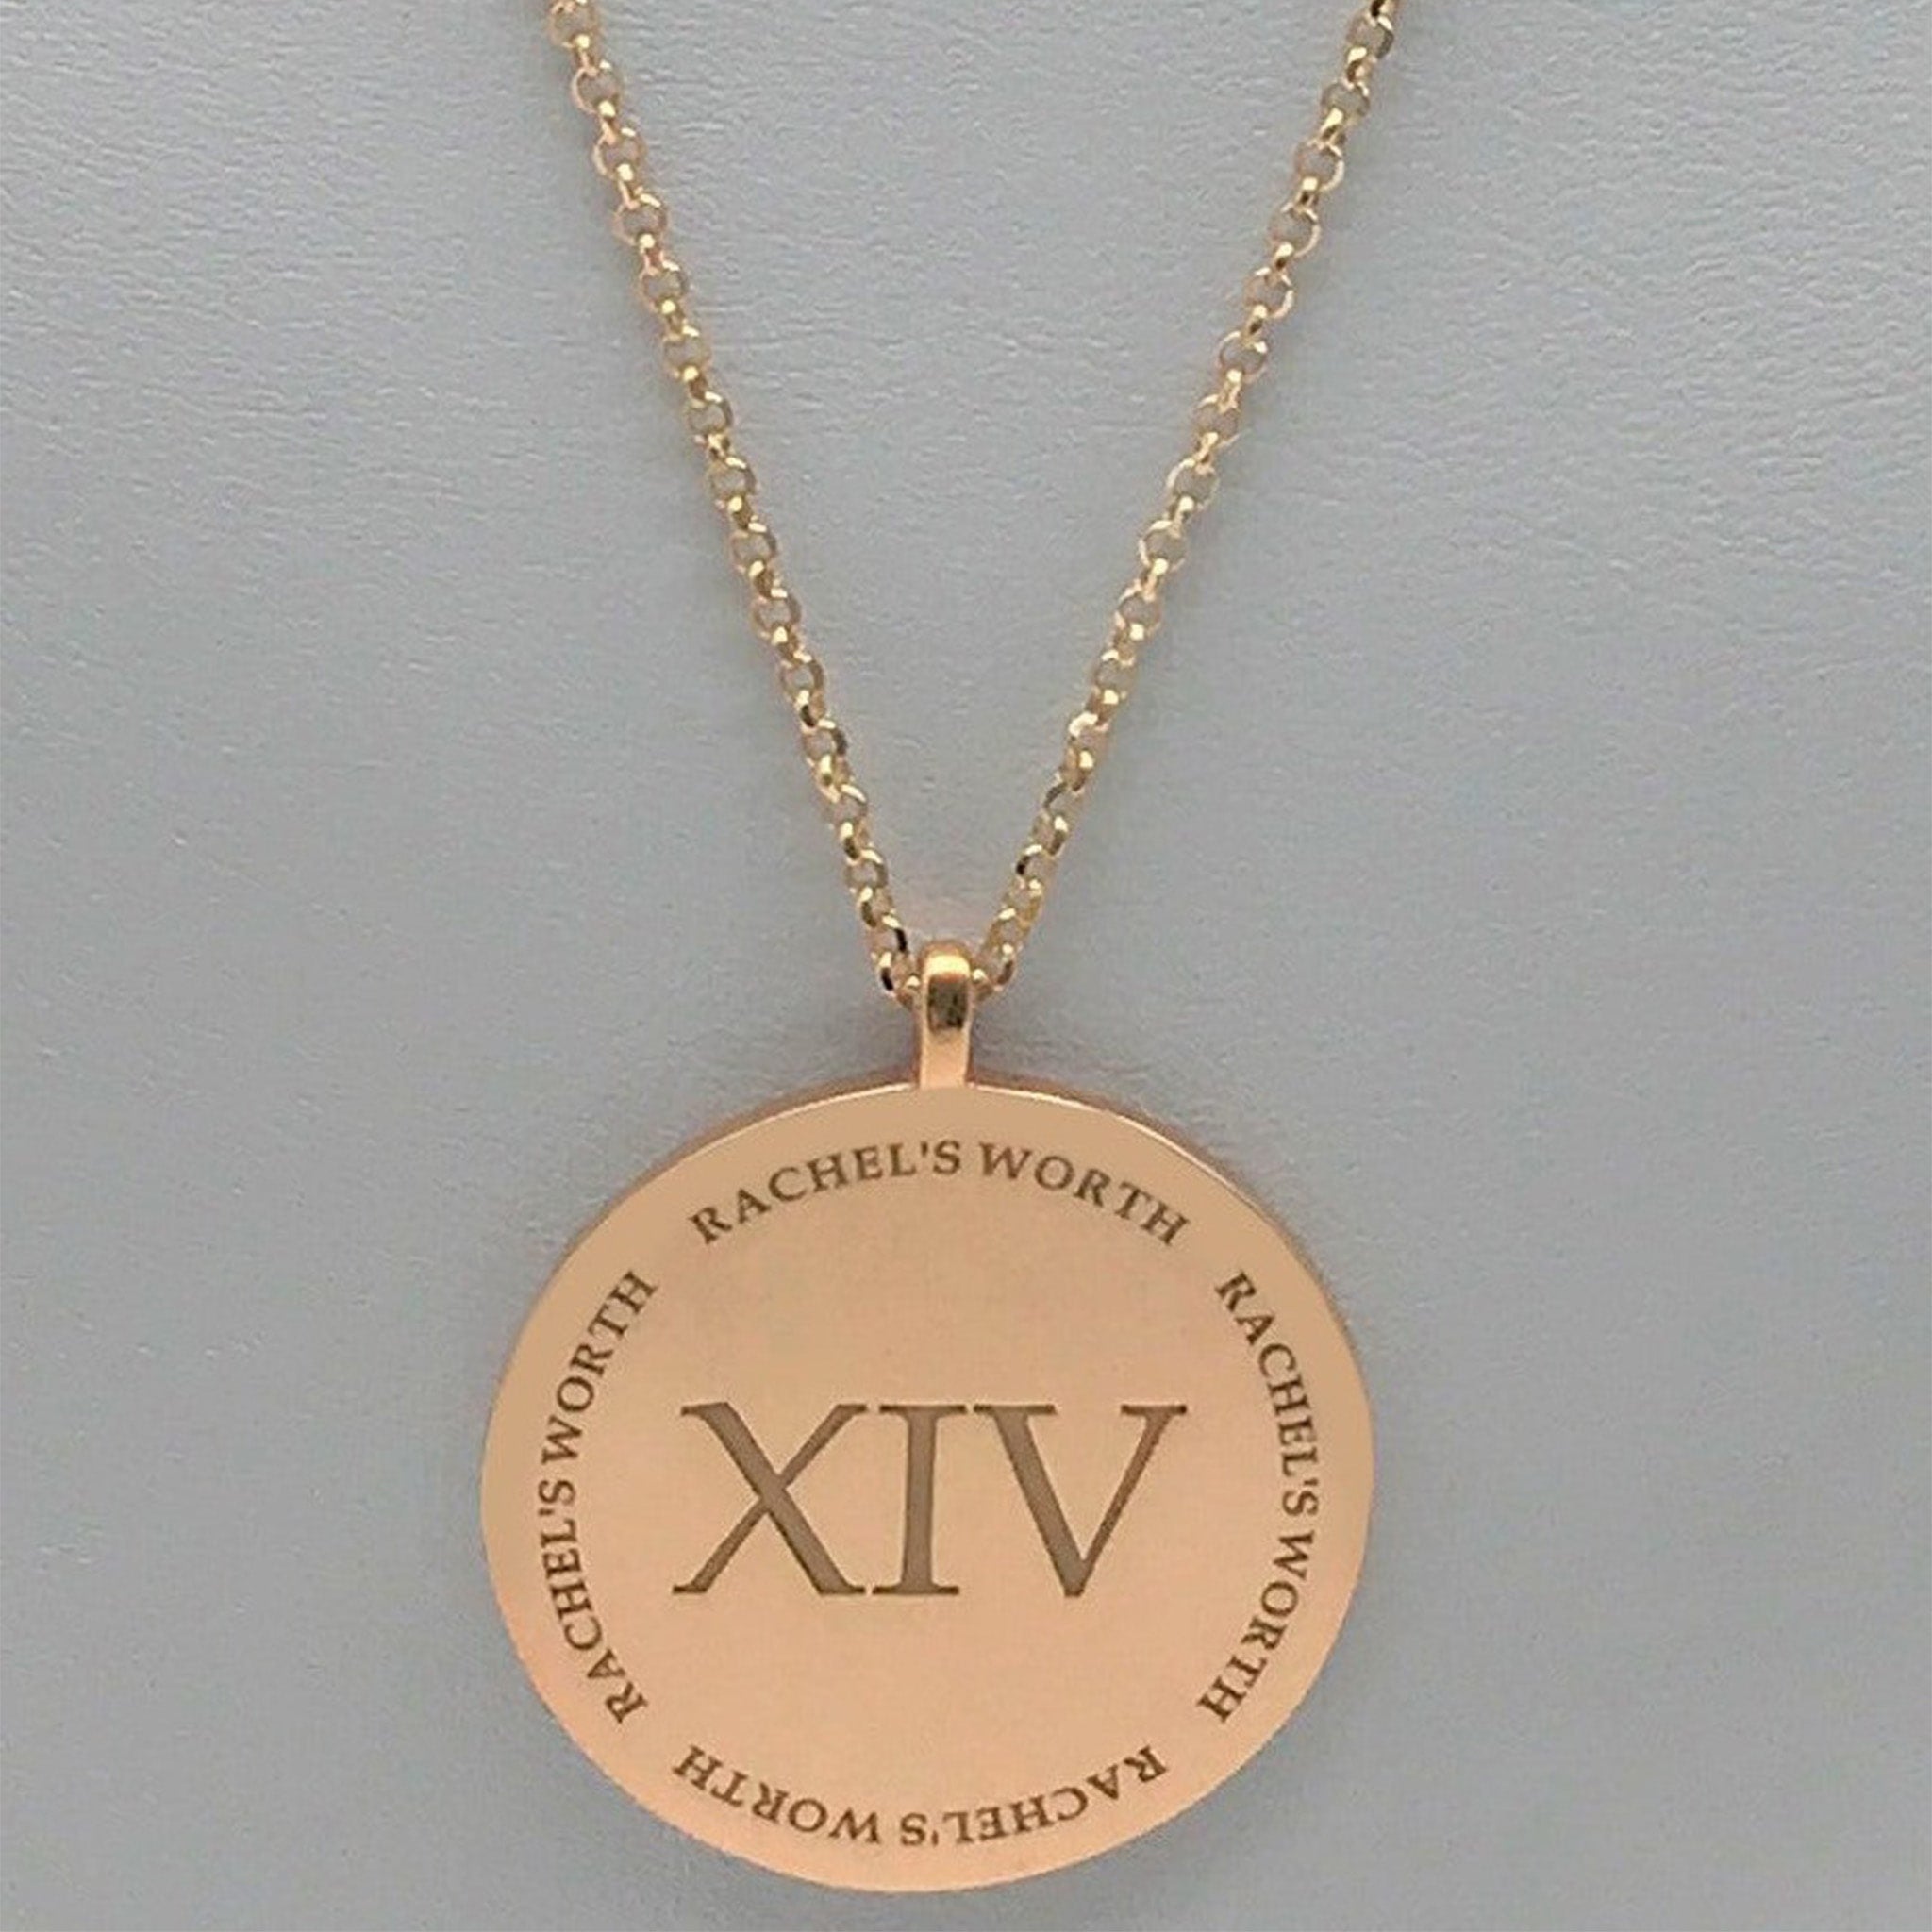 Rachel's Worth Rose Gold XIV Coin Necklace